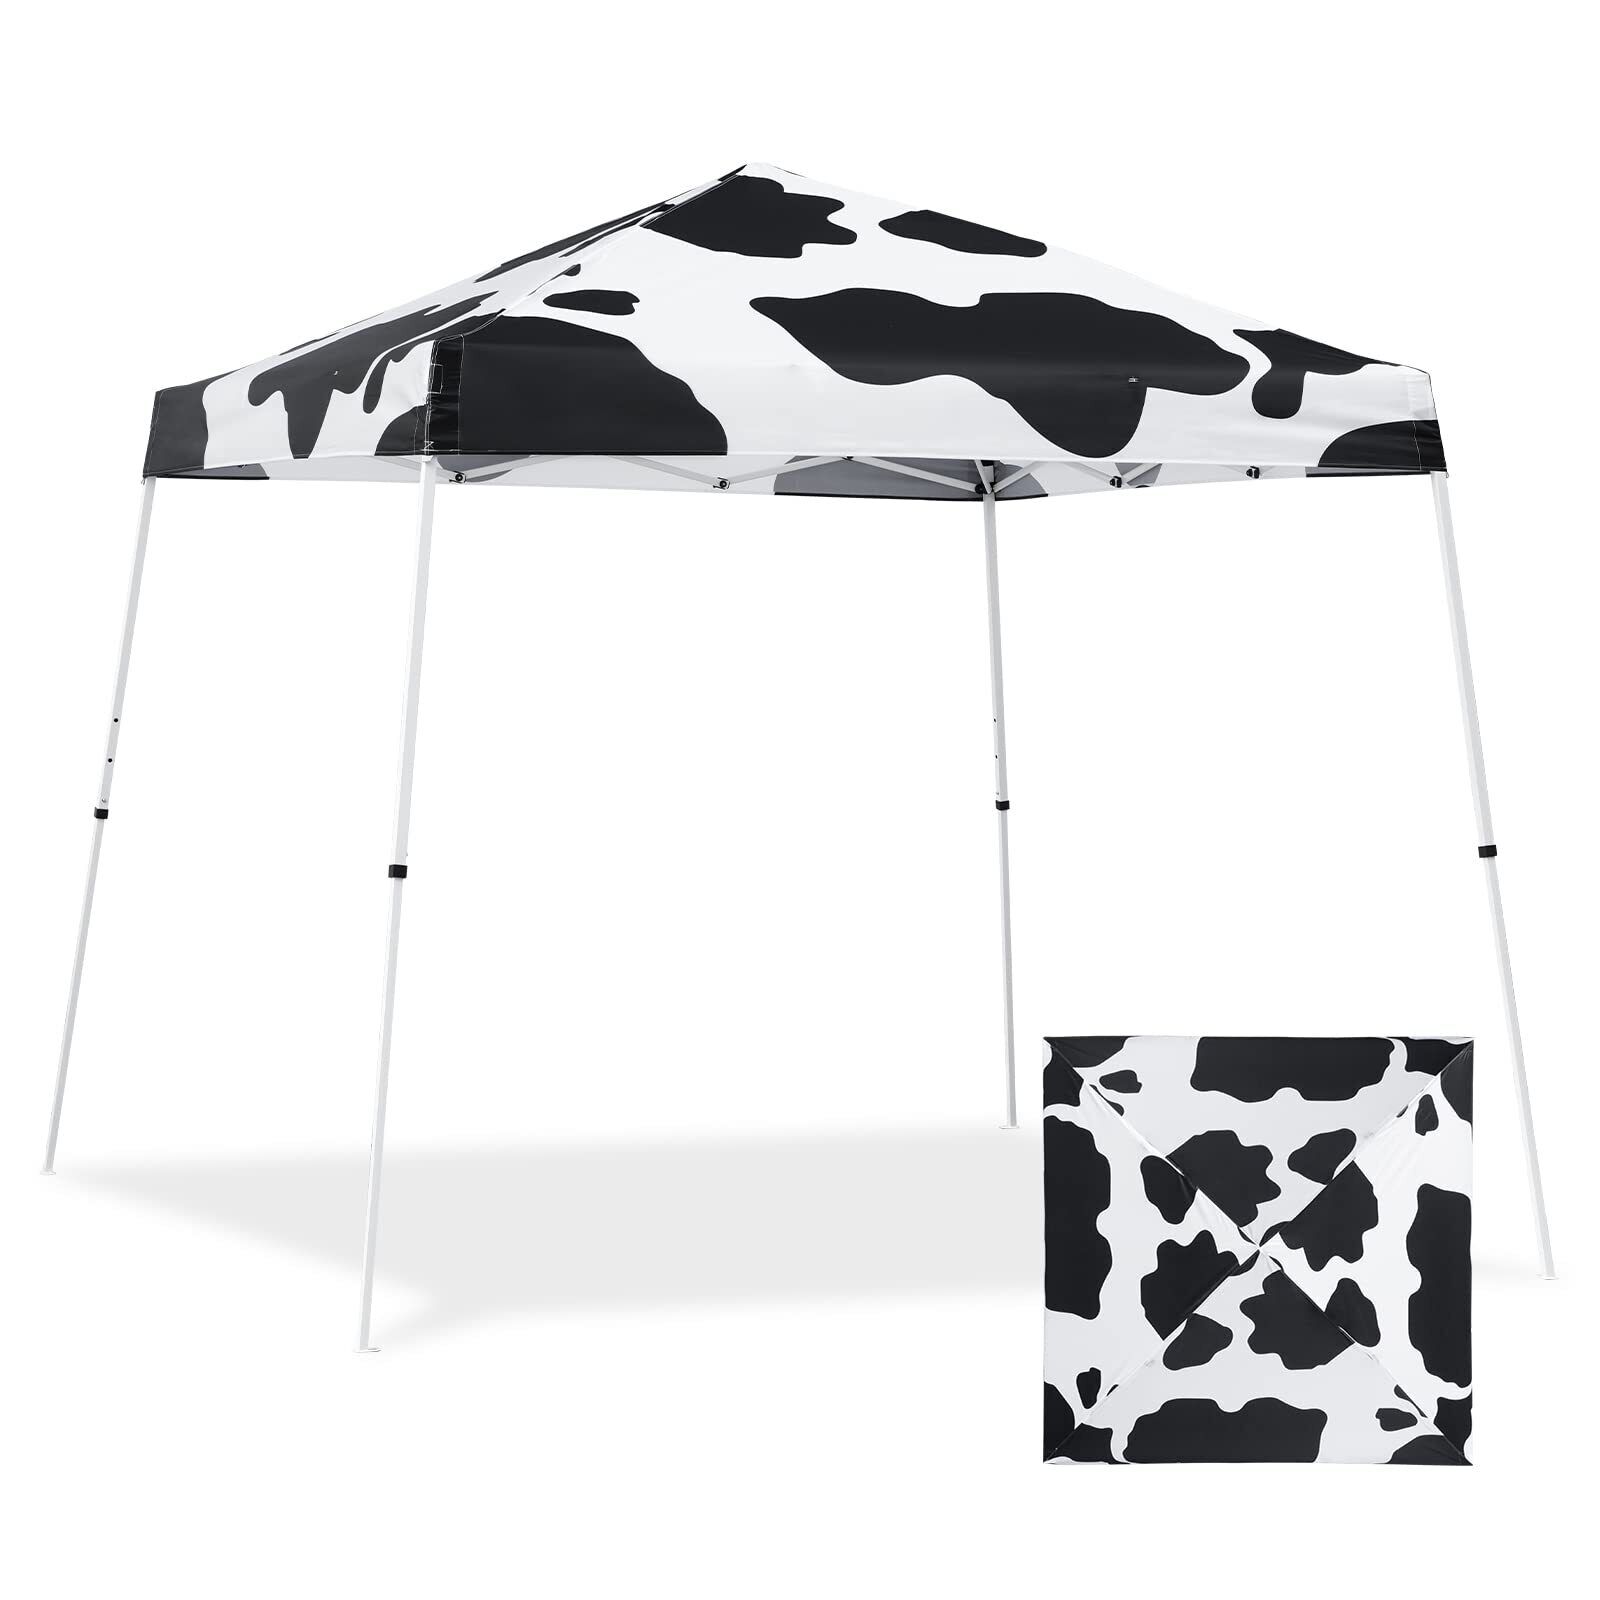 10x10 Slant Leg Pop-up Canopy Tent Easy One Person Setup Instant Outdoor Beac...